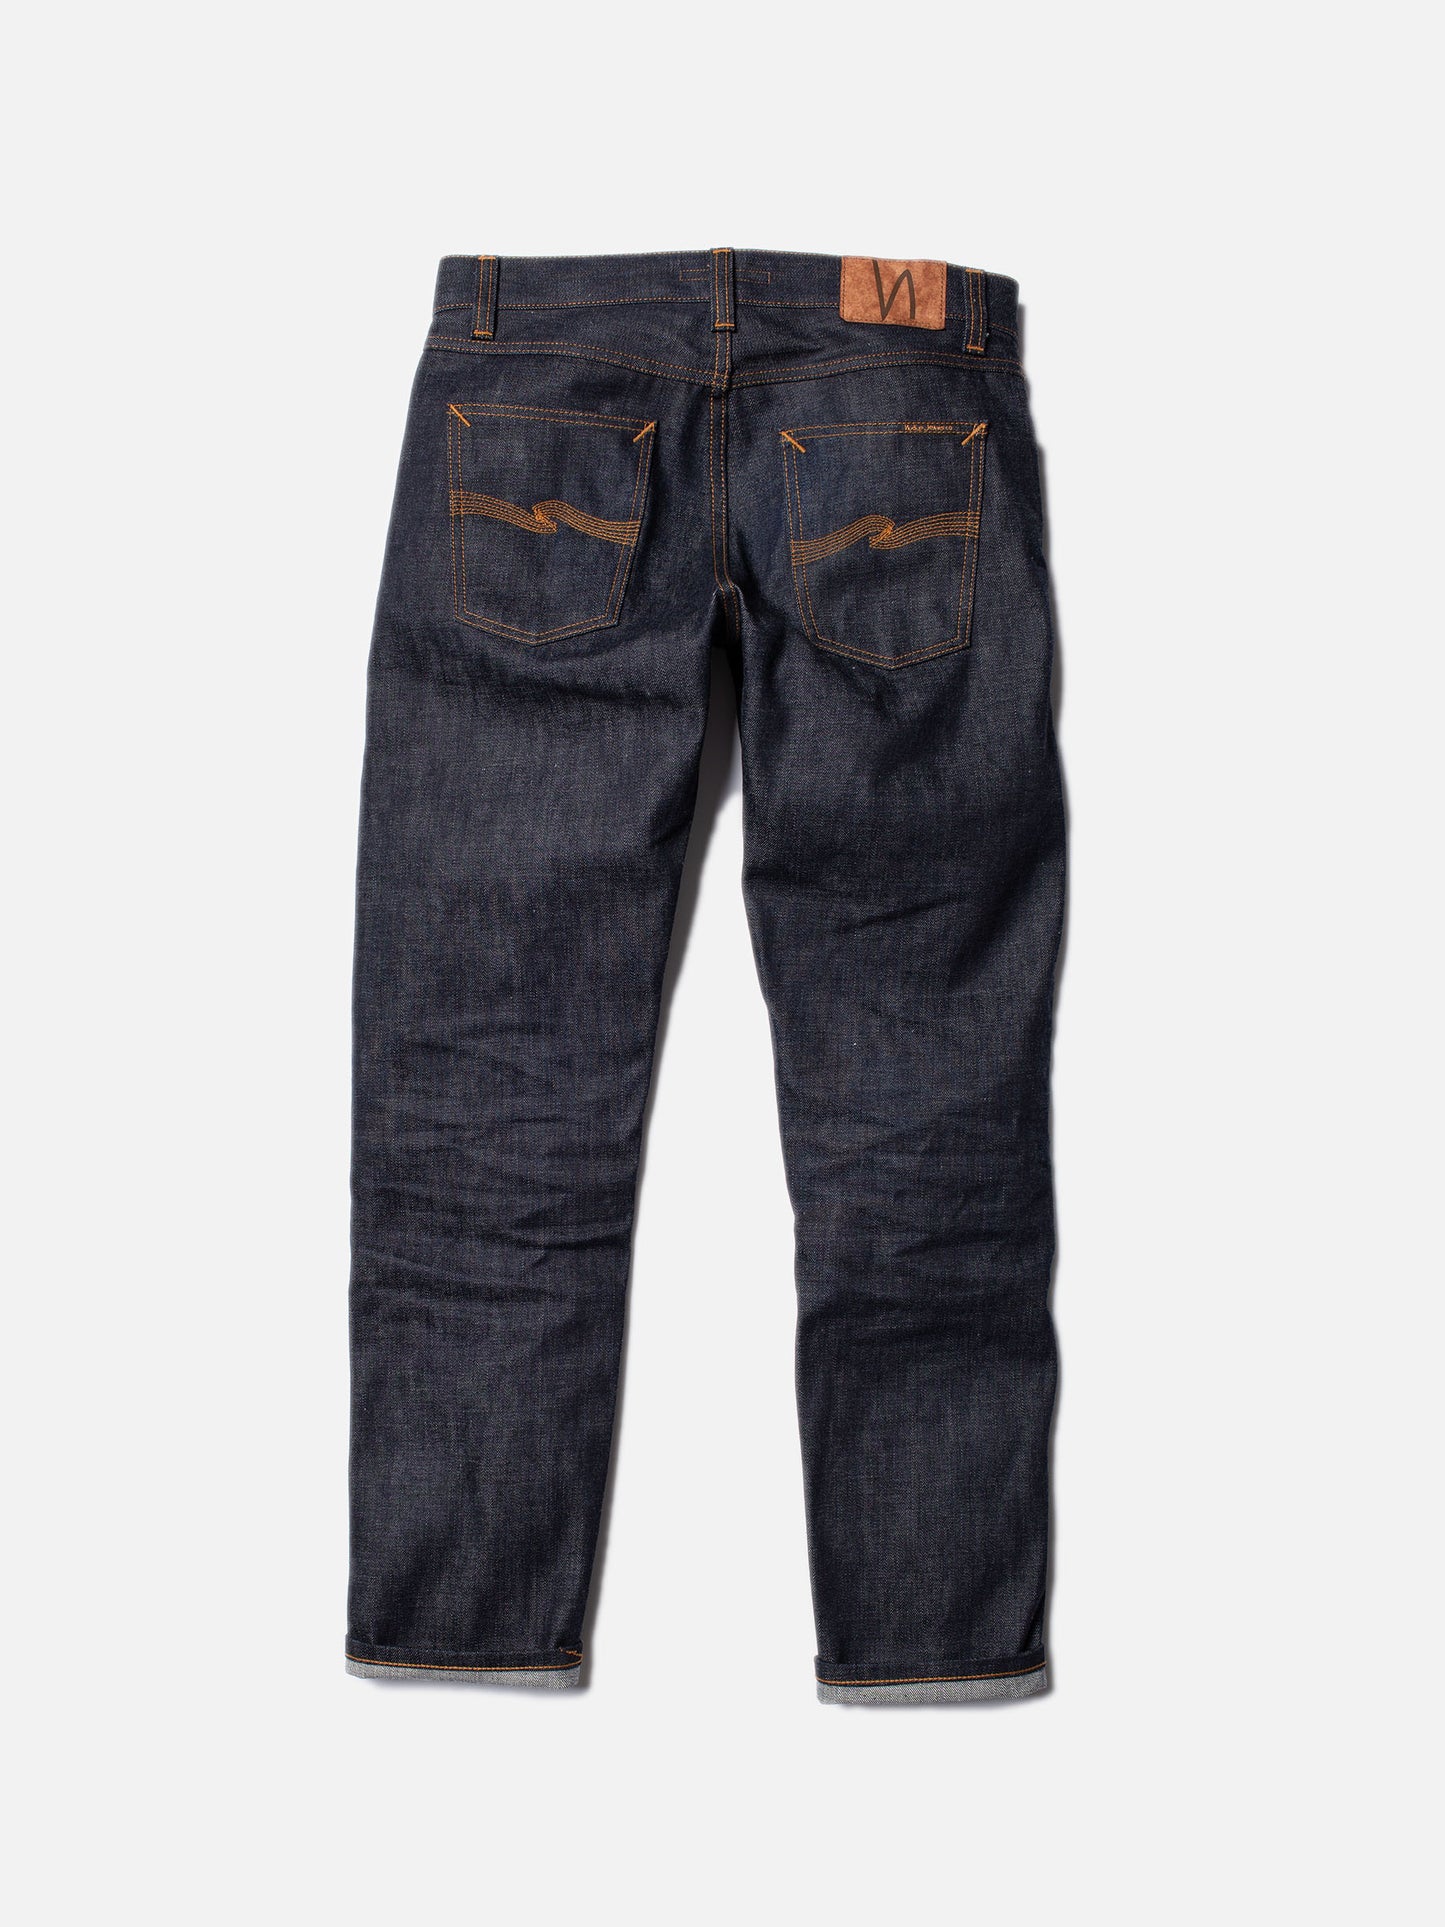 Nudie Jeans Gritty Jackson Jean L32 Dry Ruby Selvage